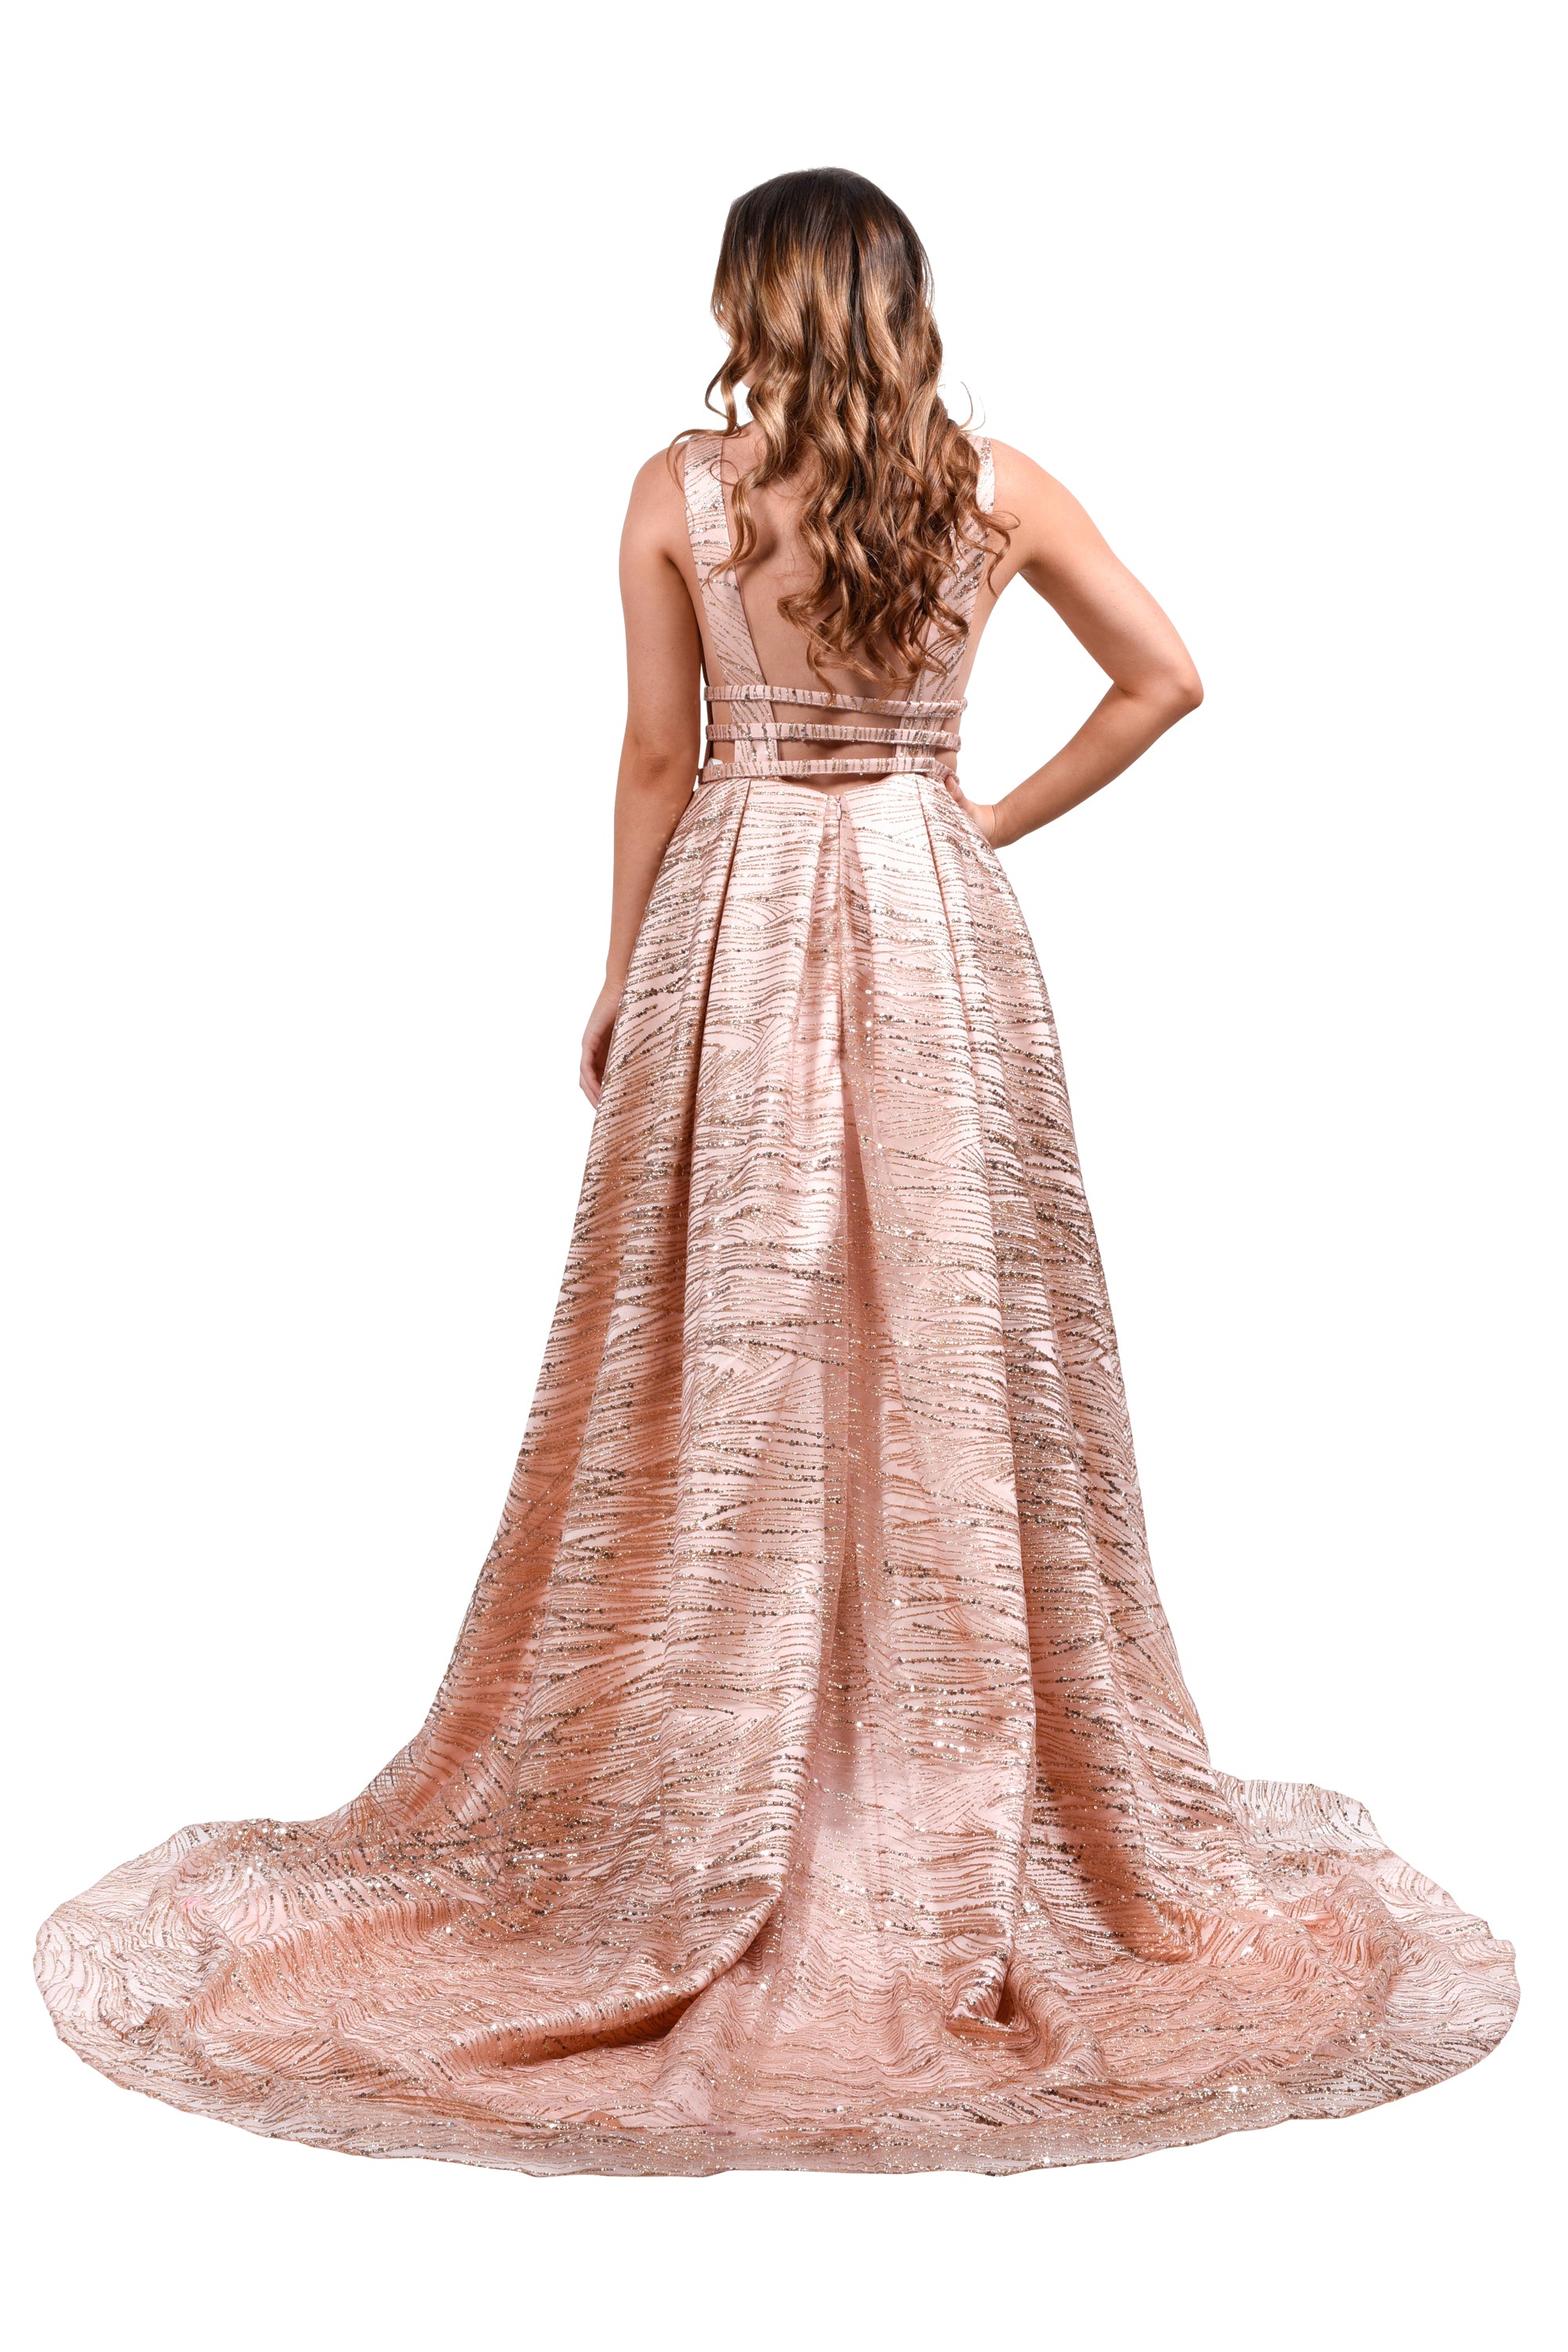 Honey Couture ZOEY Gold Glitter Infused Formal Ball Gown Private Label$ AfterPay Humm ZipPay LayBuy Sezzle